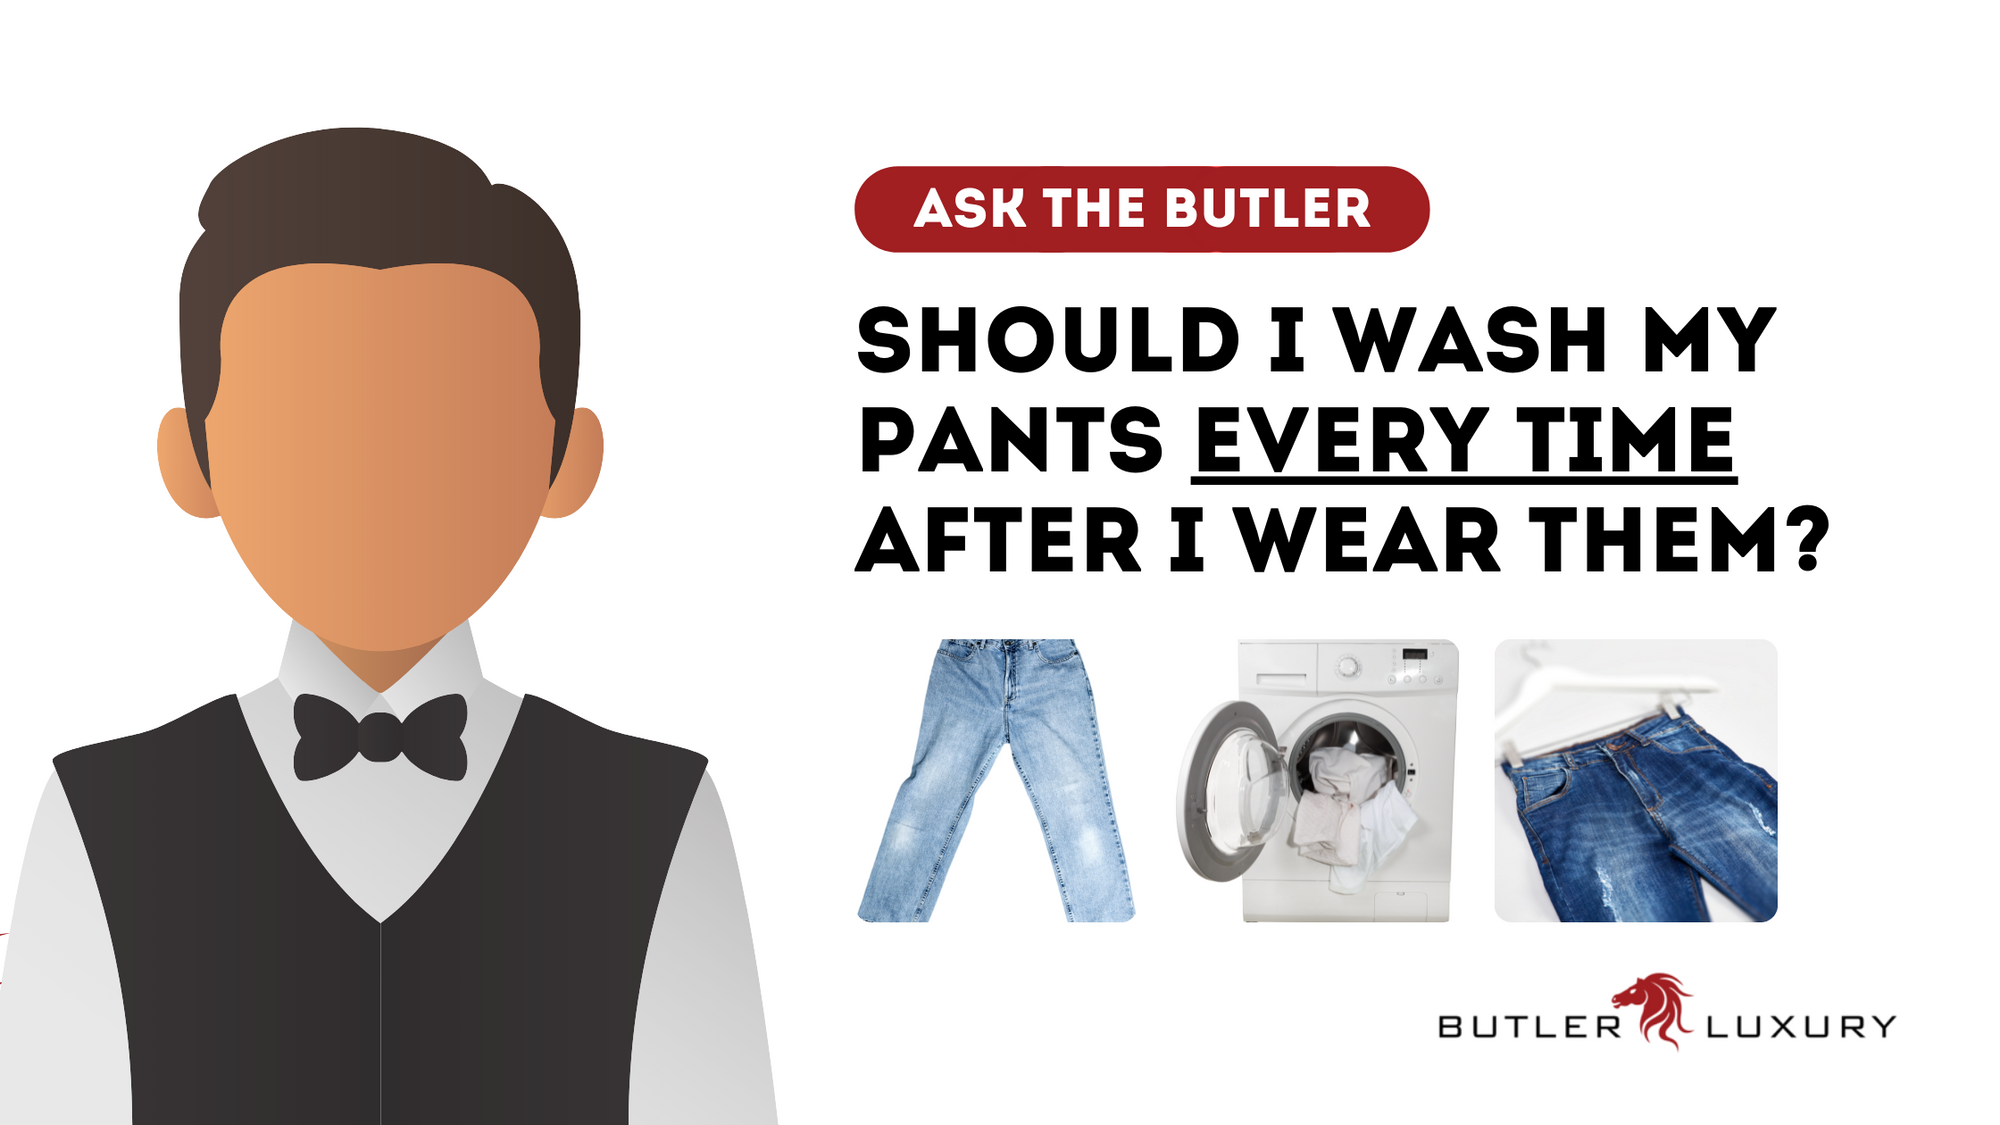 Ask the Butler: Should I Wash My Pants Every Time After I Wear Them?